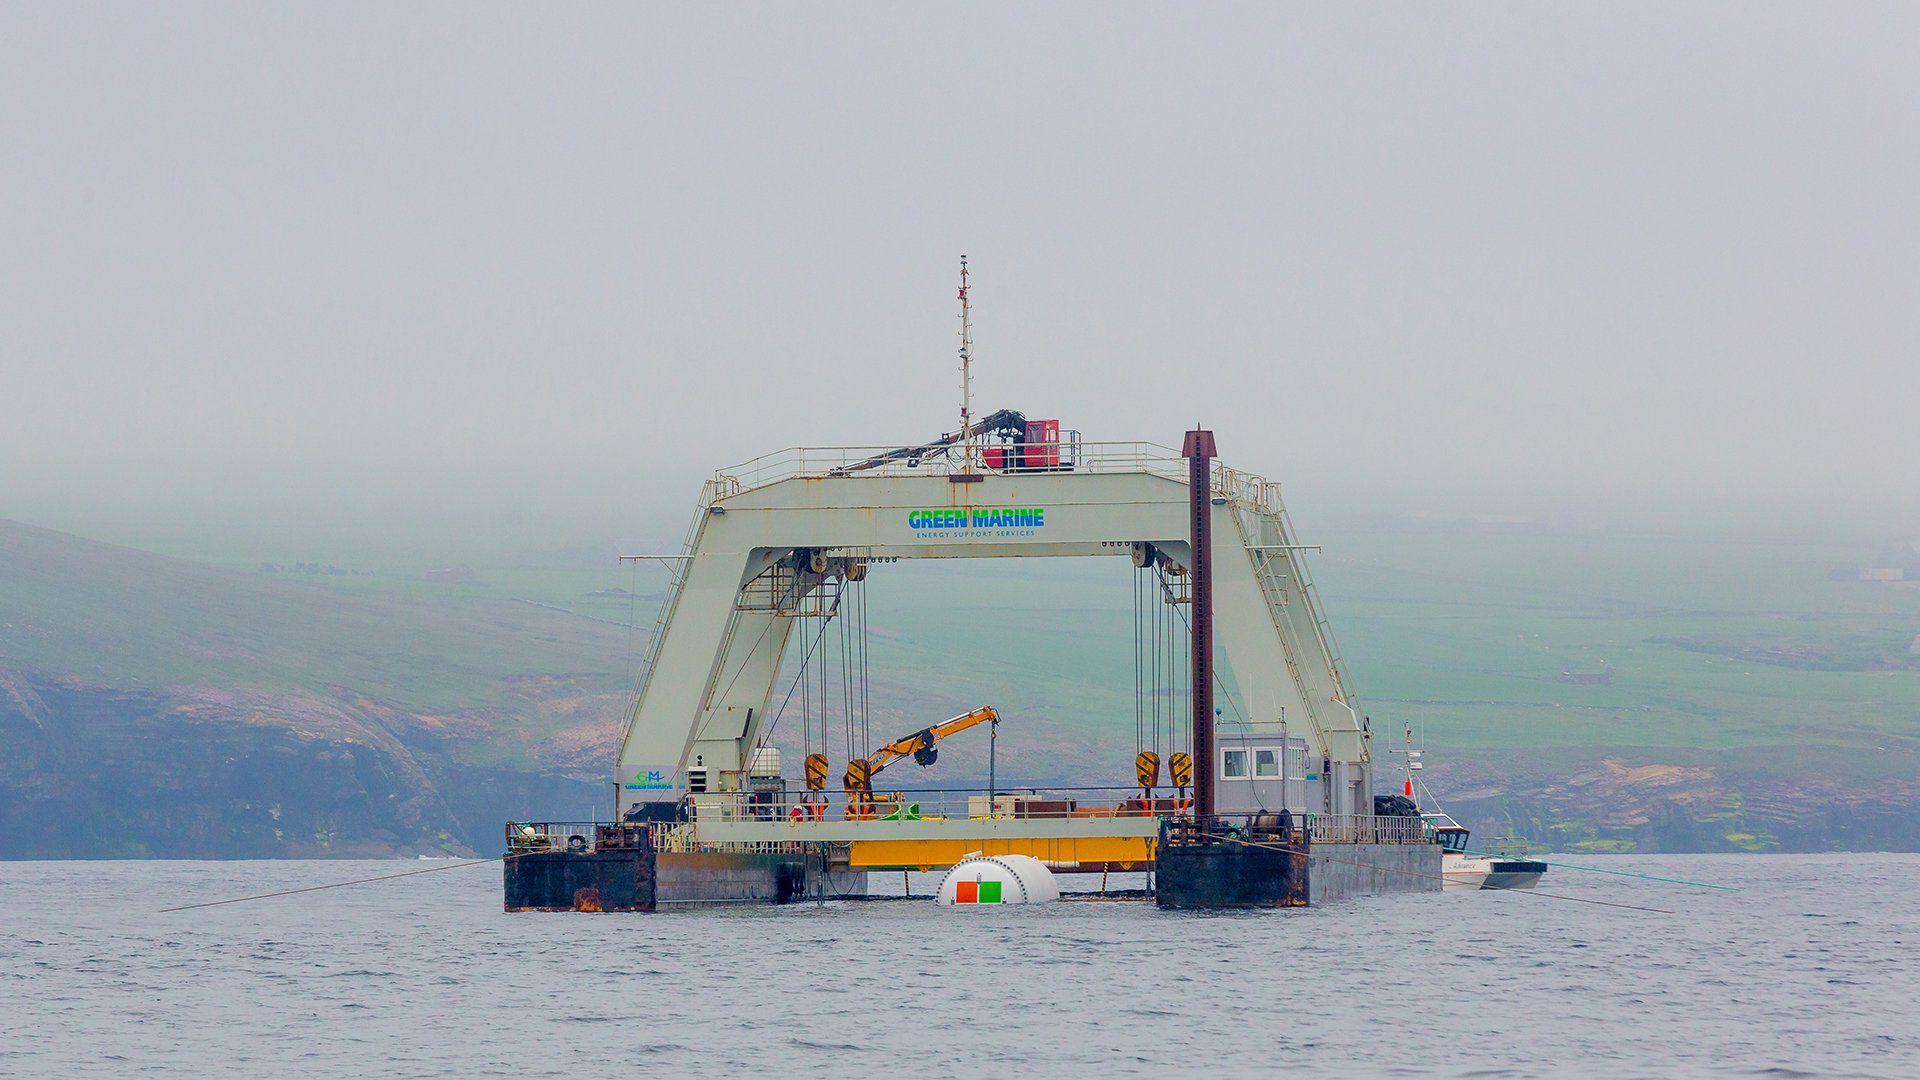 Microsoft is now operating a data center under the sea — Quartz